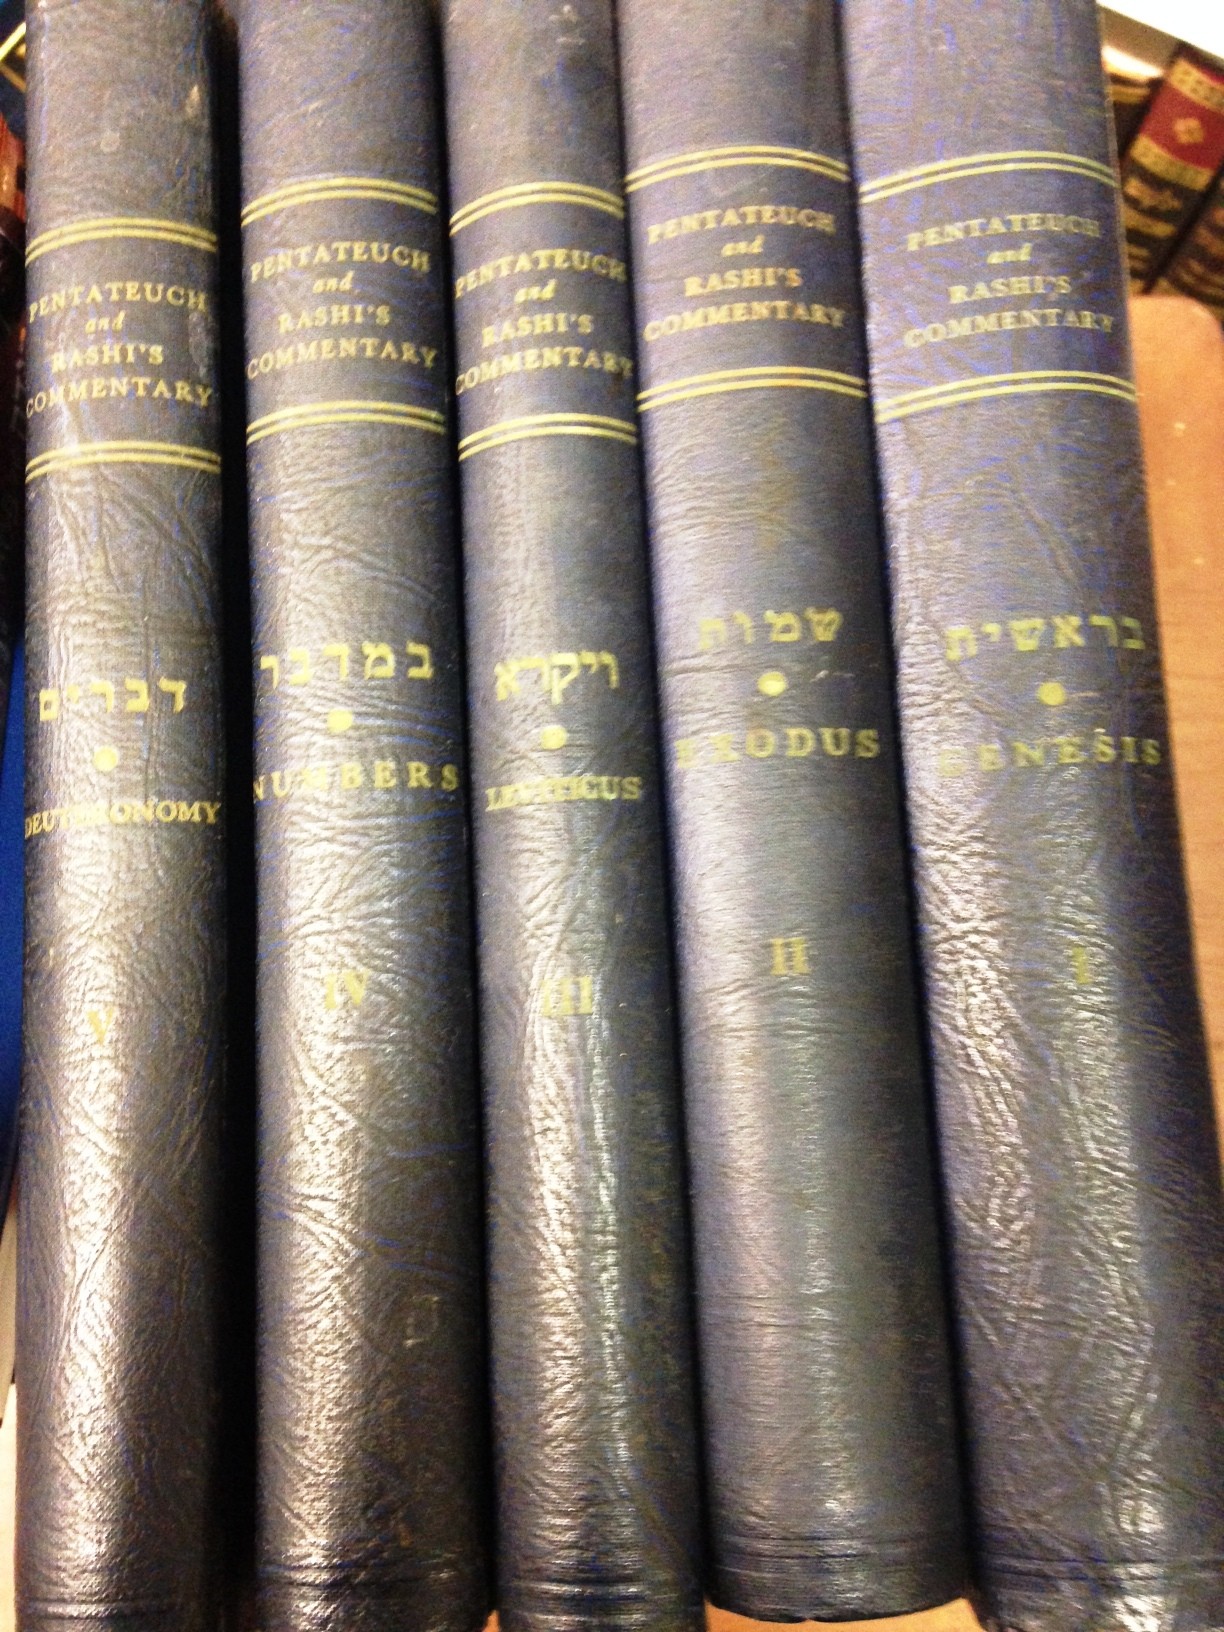  The Pentateuch and Rashi's Commentary